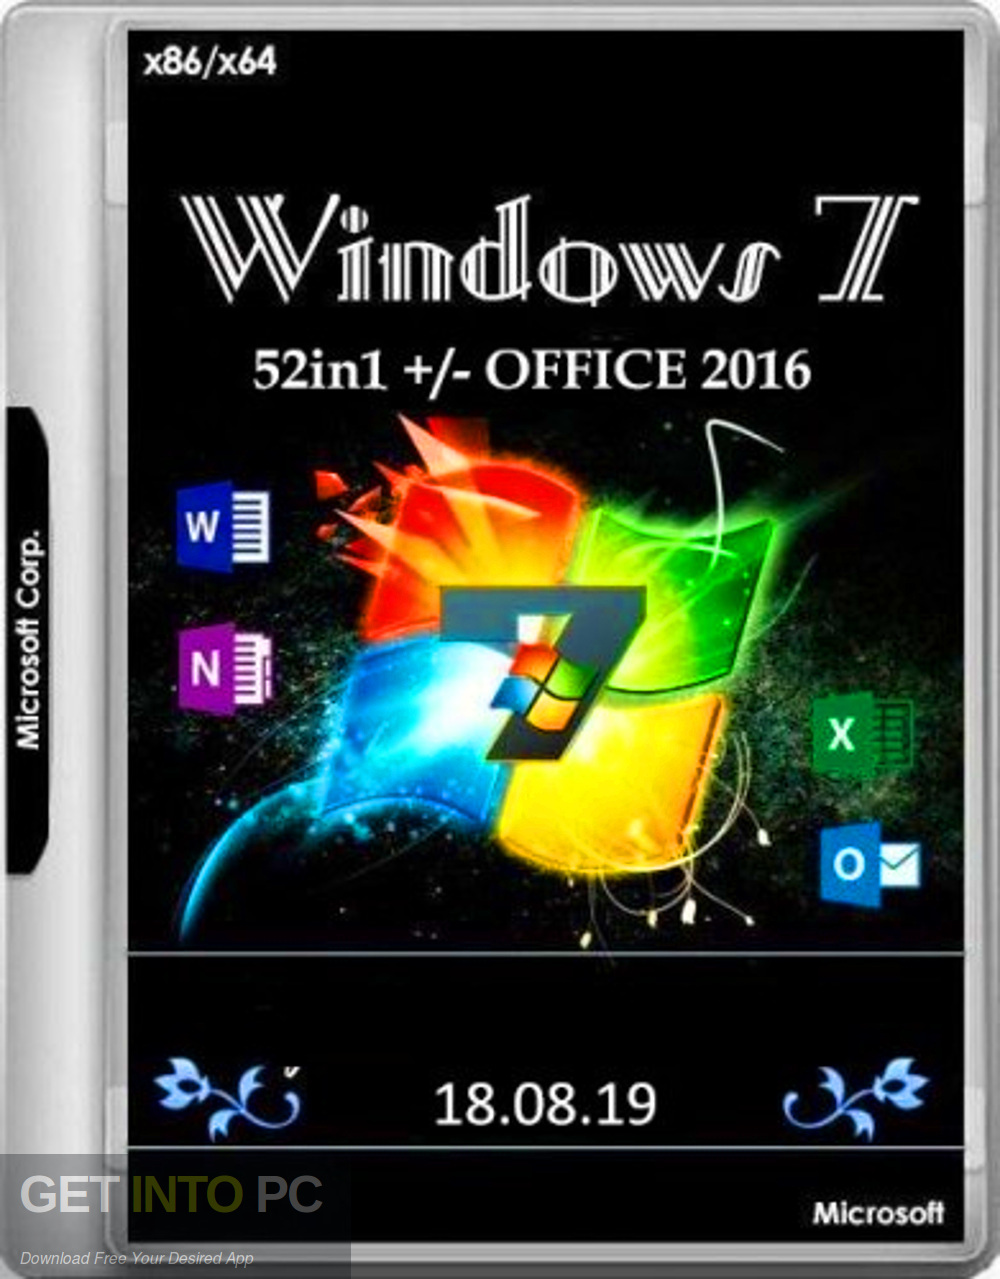 Windows 7 SP1 52in1 Office 2016 Updated Aug 2019 Free Download GetintoPC.com